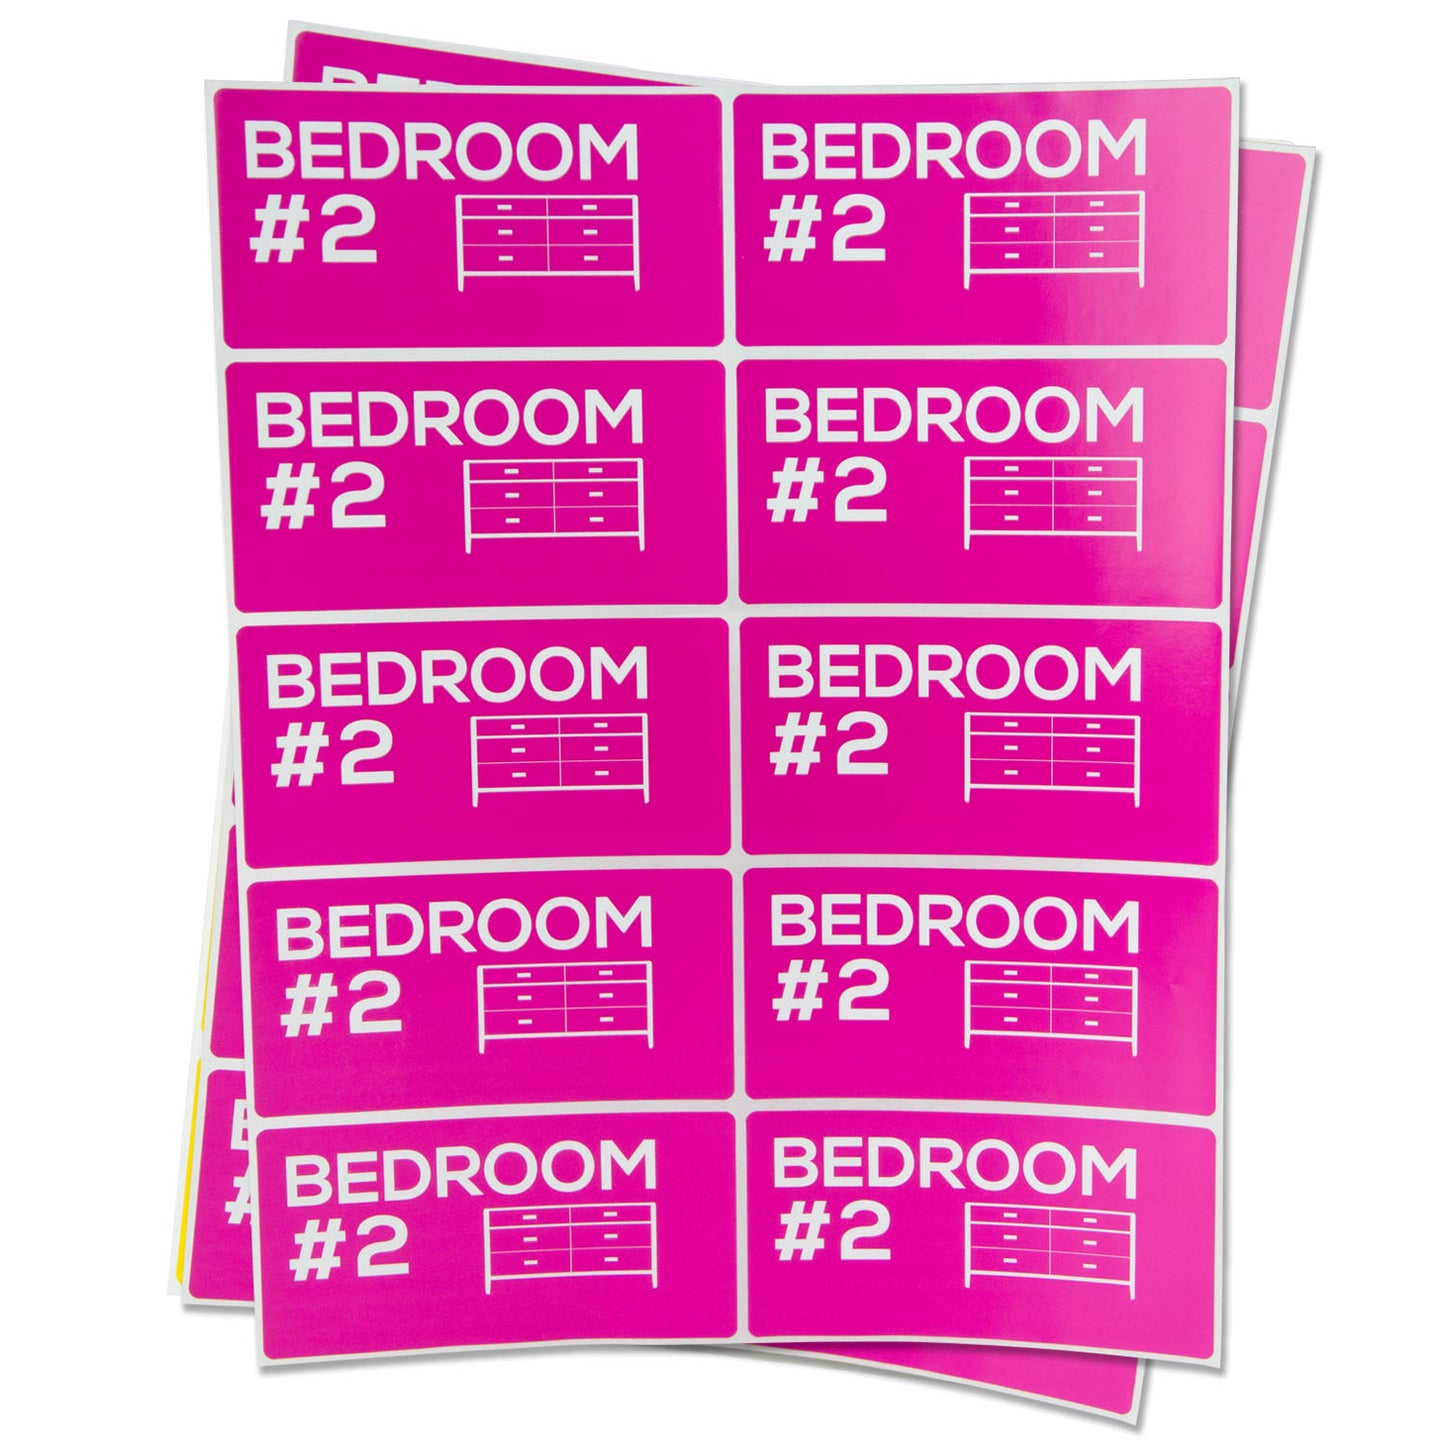 4 x 2 inch | Moving & Packing: Bedroom #2 Stickers